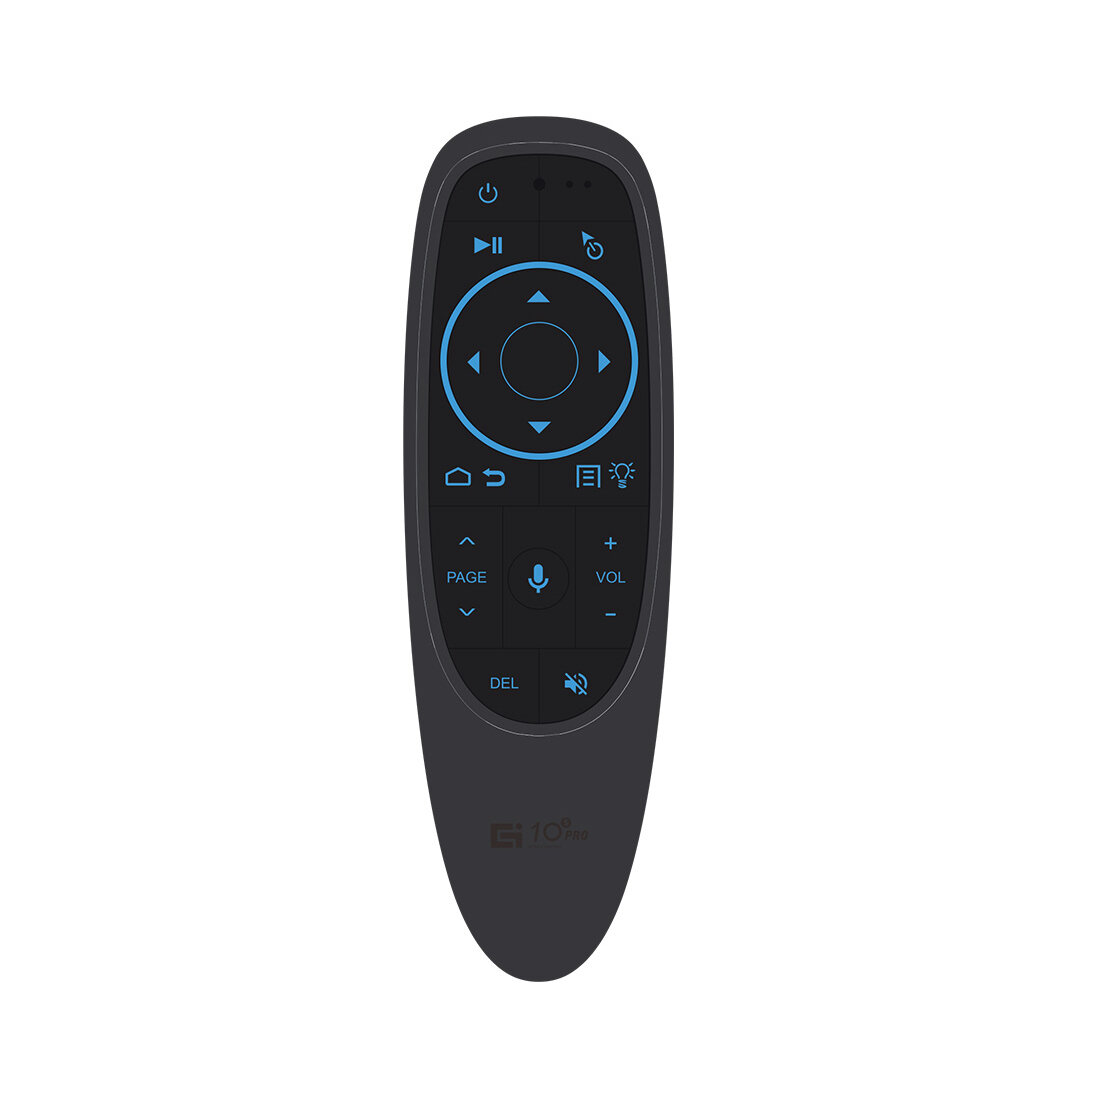 G10S Pro BT Air Mouse Voice Control 2.4G Wireless Bluetooth 5.0  Smart Remote Control for Google Assistant Android TV Box TV Ras